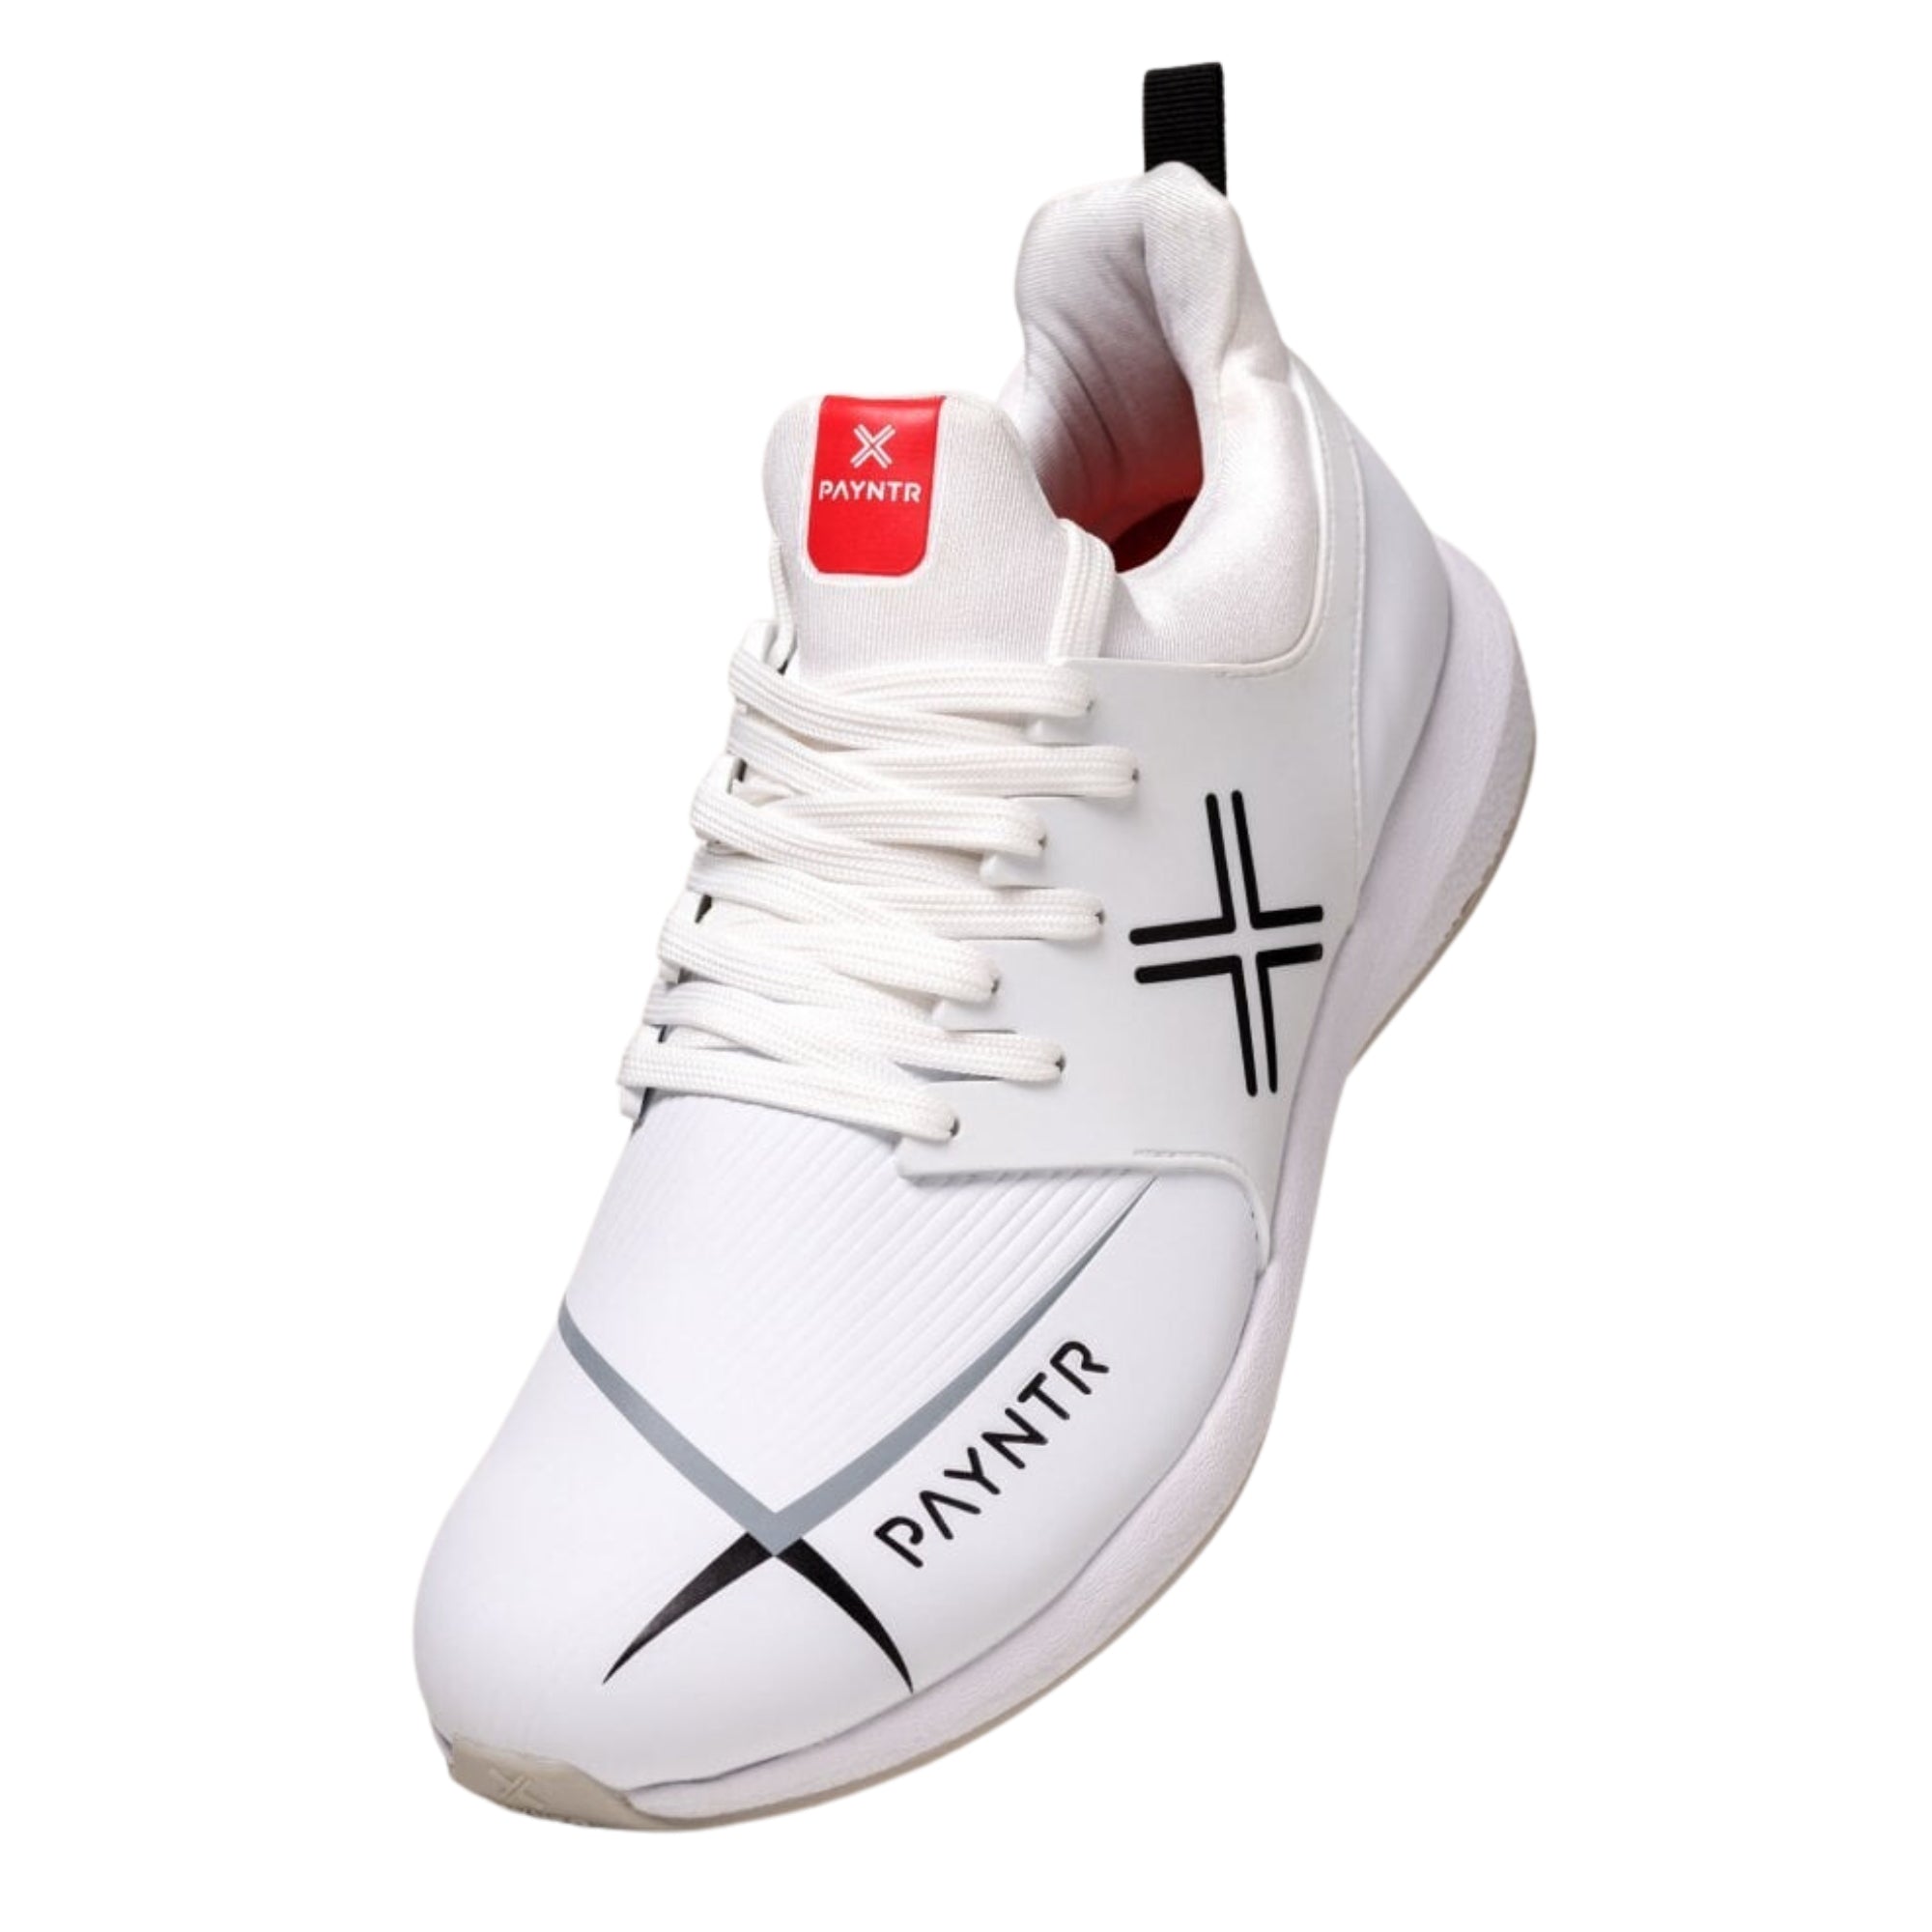 Payntr Cricket Shoes, Model X MK3 Pimple - All White All Rounder Cricket Shoes